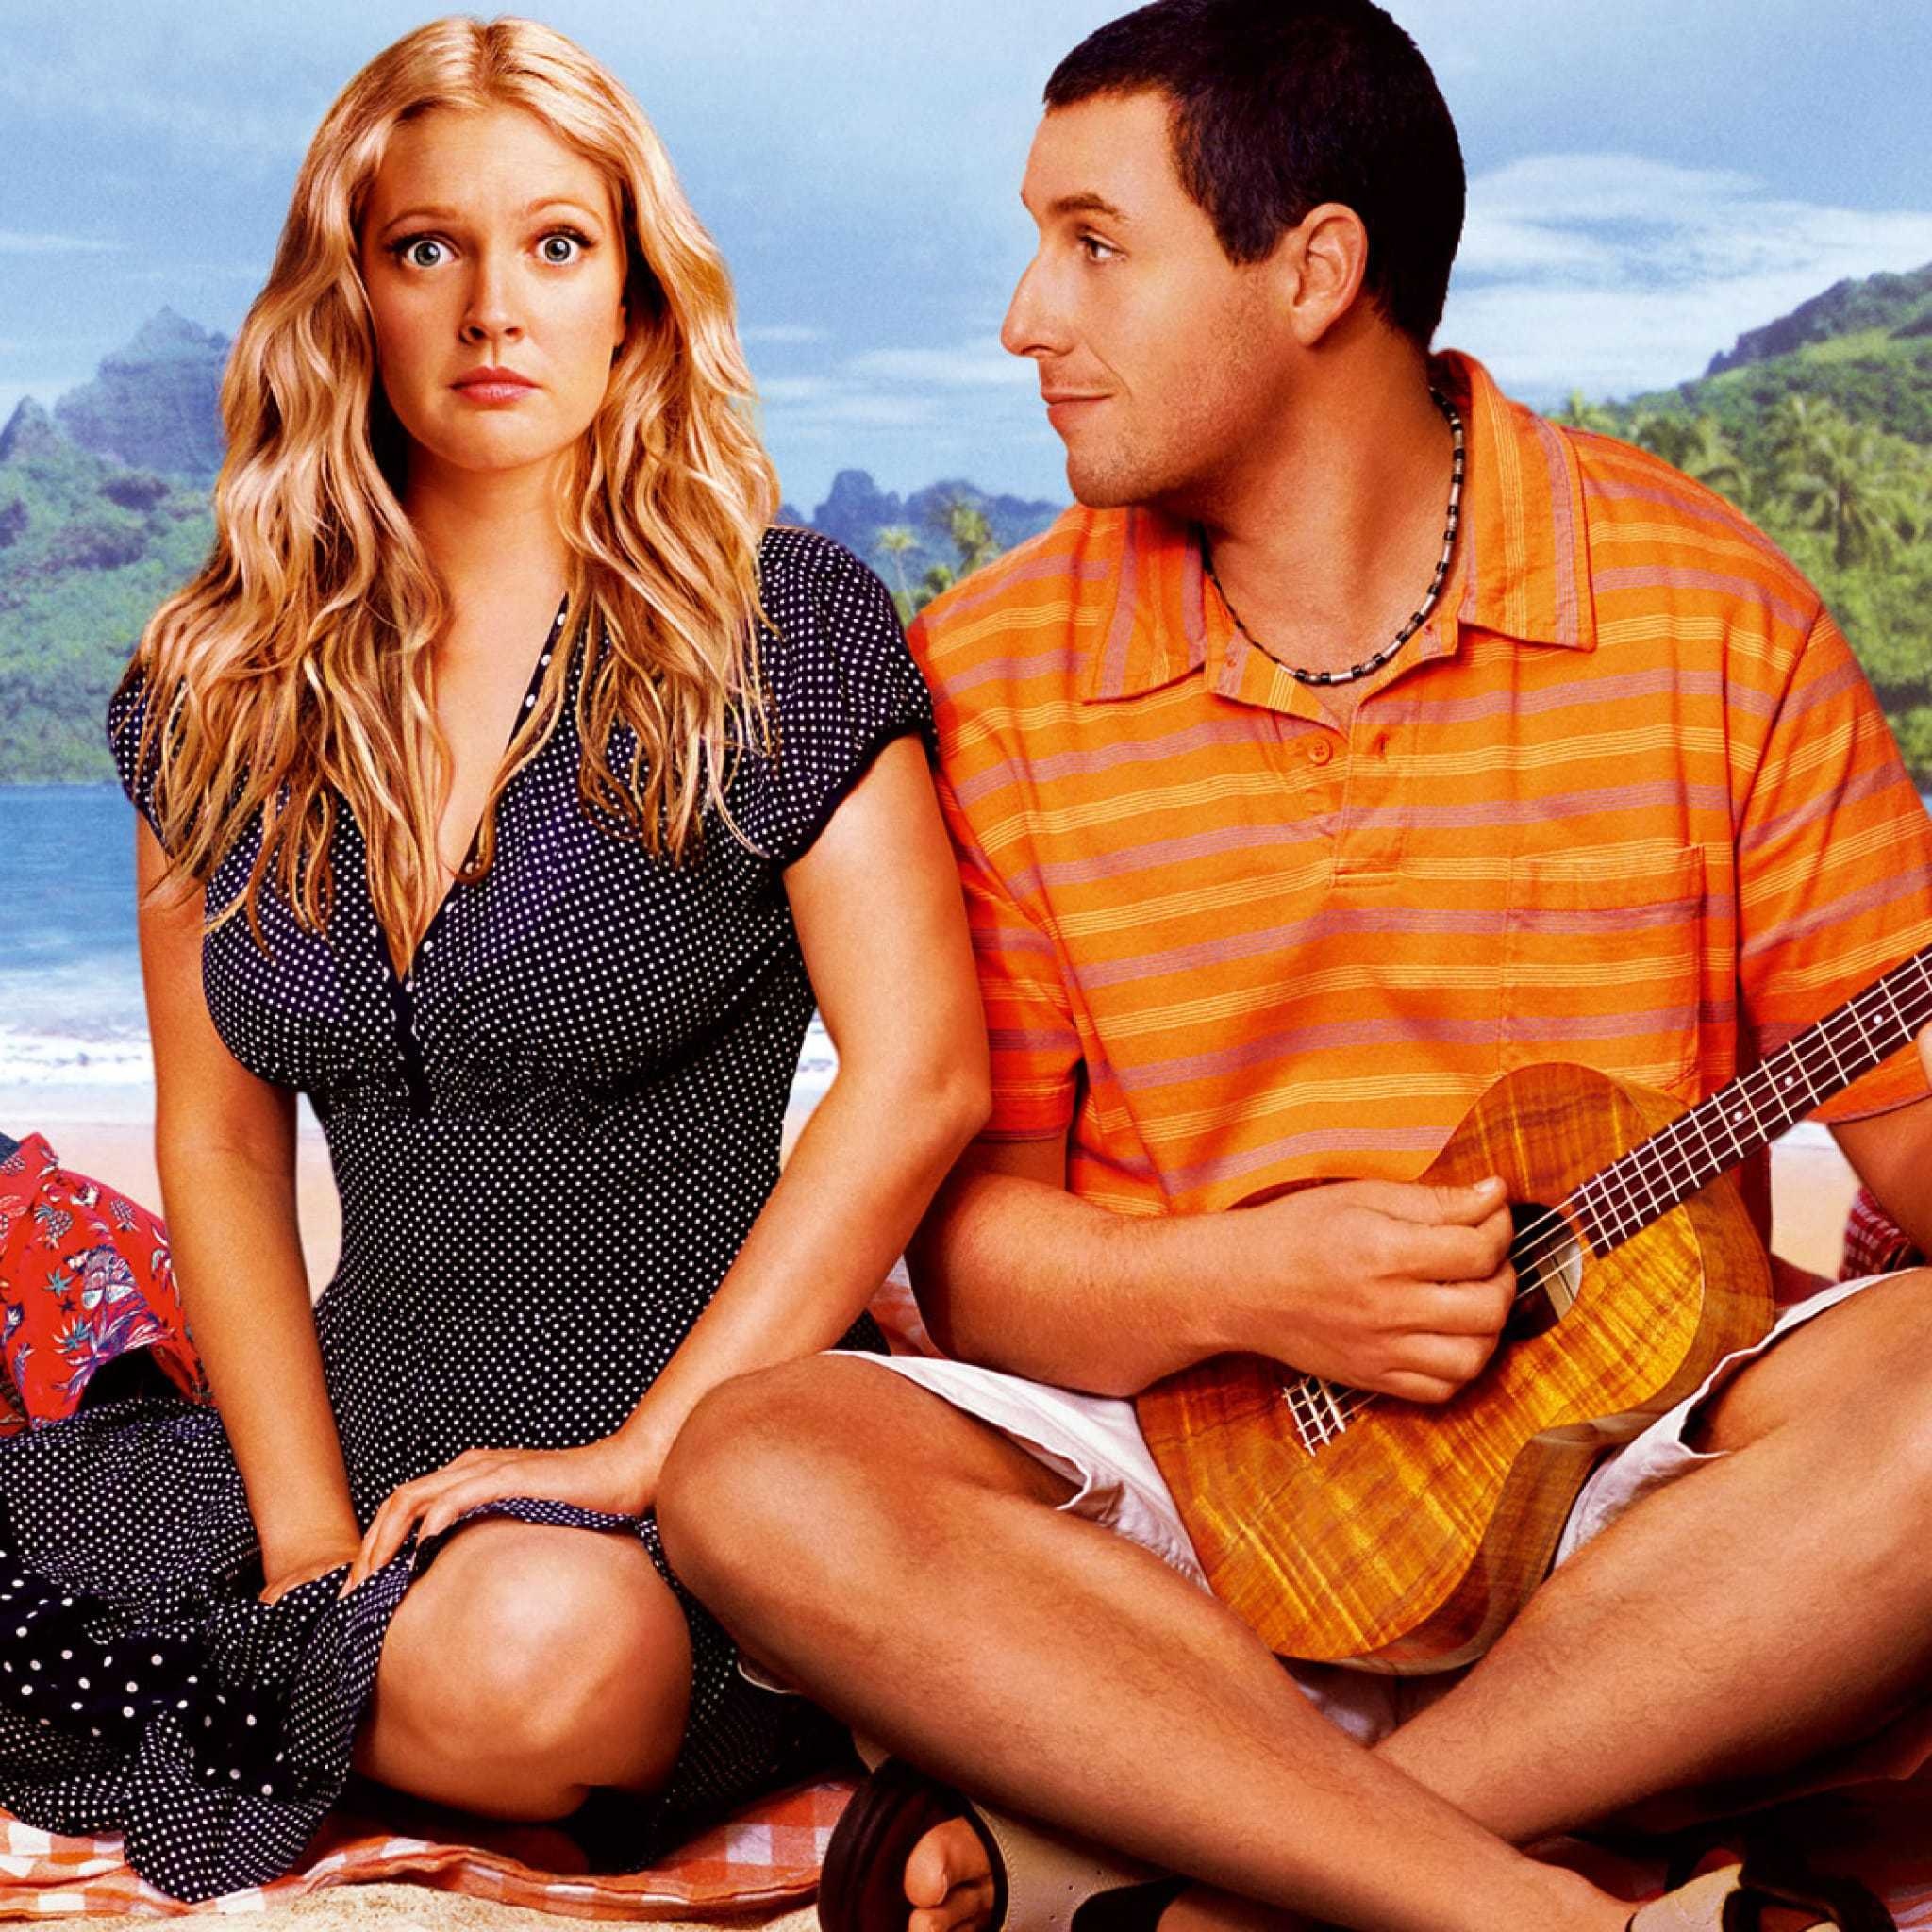 Adam Sandler movies, Awesome backgrounds, Free HD wallpapers, 2050x2050 HD Handy